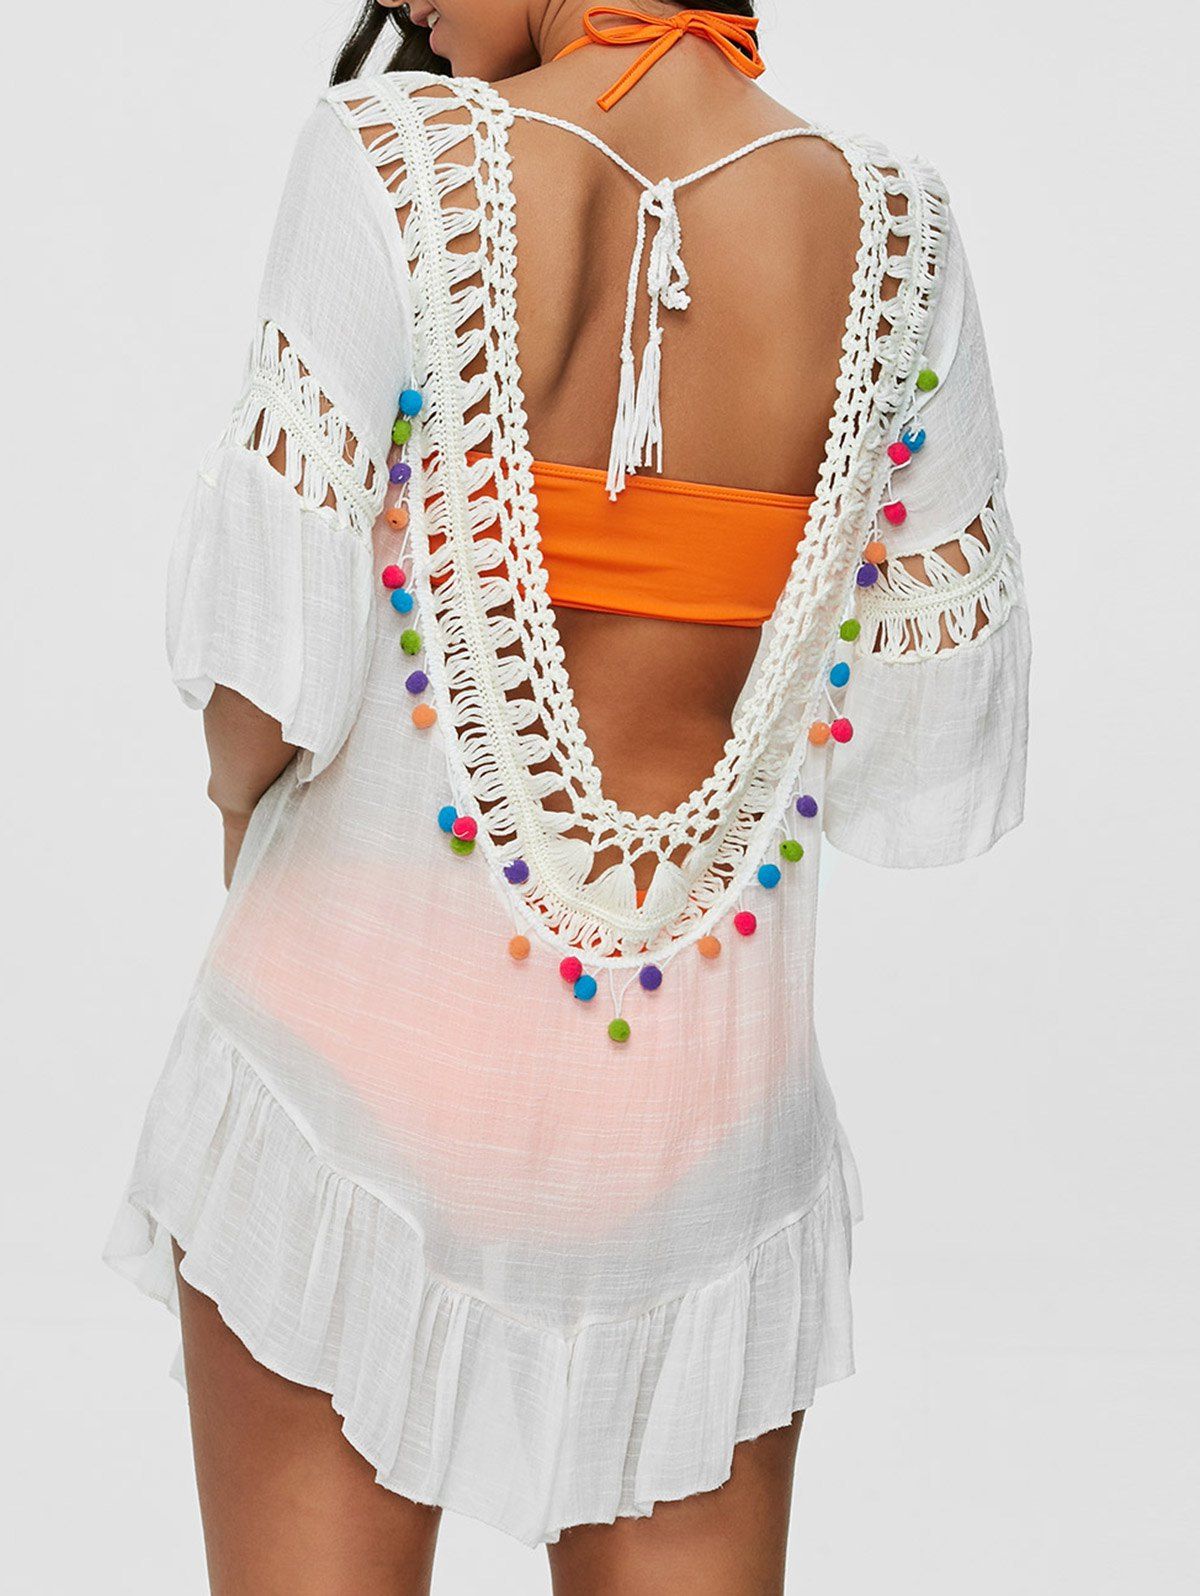 Best Pompon See-Through Crochet Tunic Beach Cover Up  